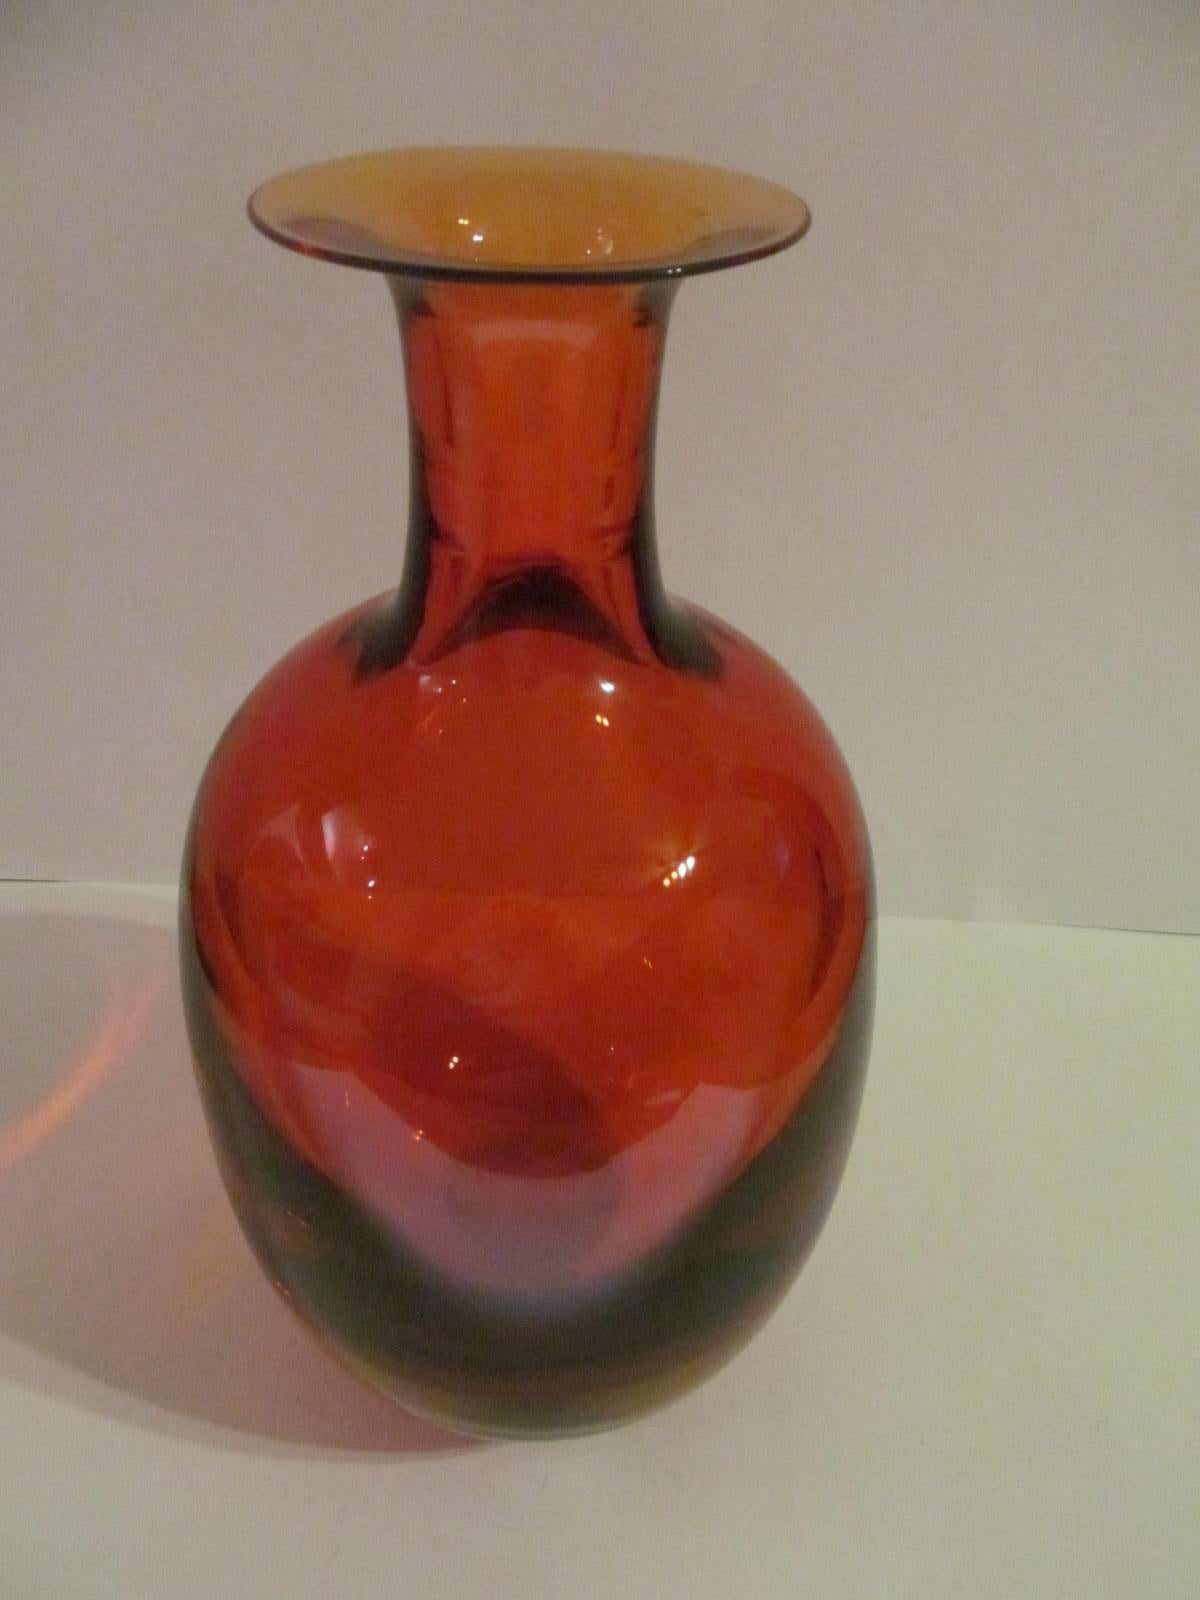 Monumental Sommerso vase by Archimede Seguso. Signed with an original label.